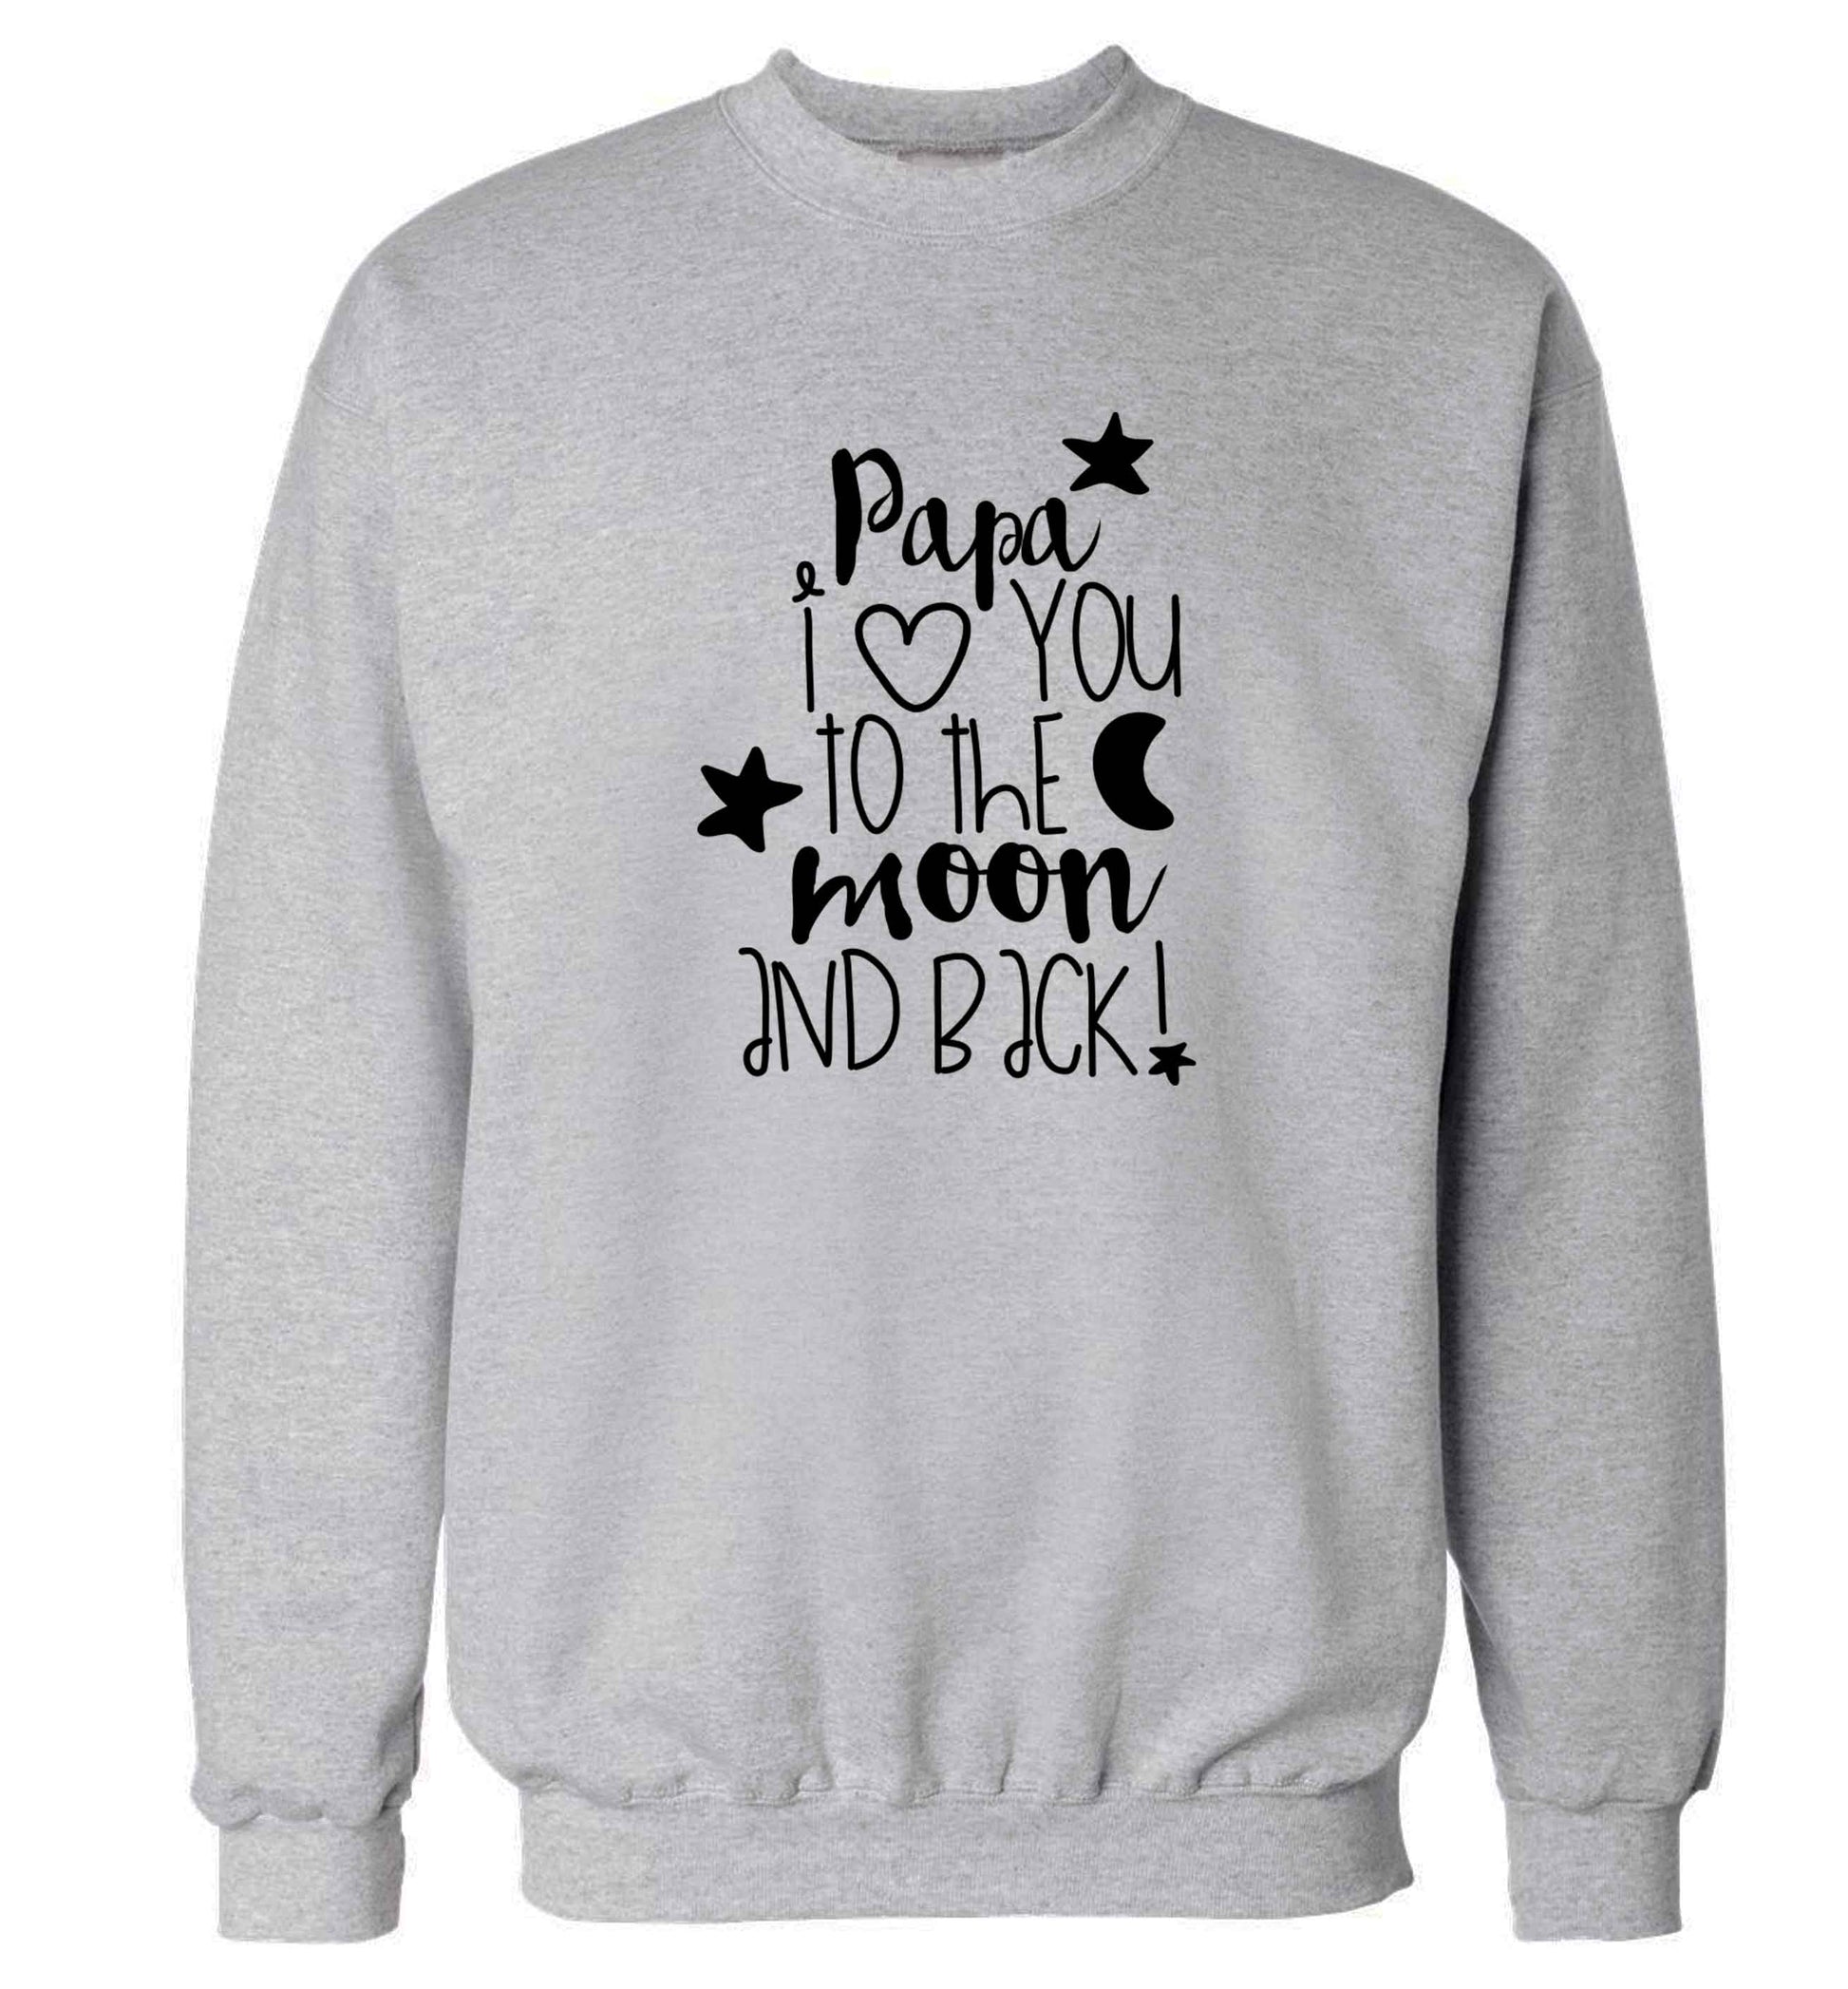 Papa I love you to the moon and back adult's unisex grey sweater 2XL